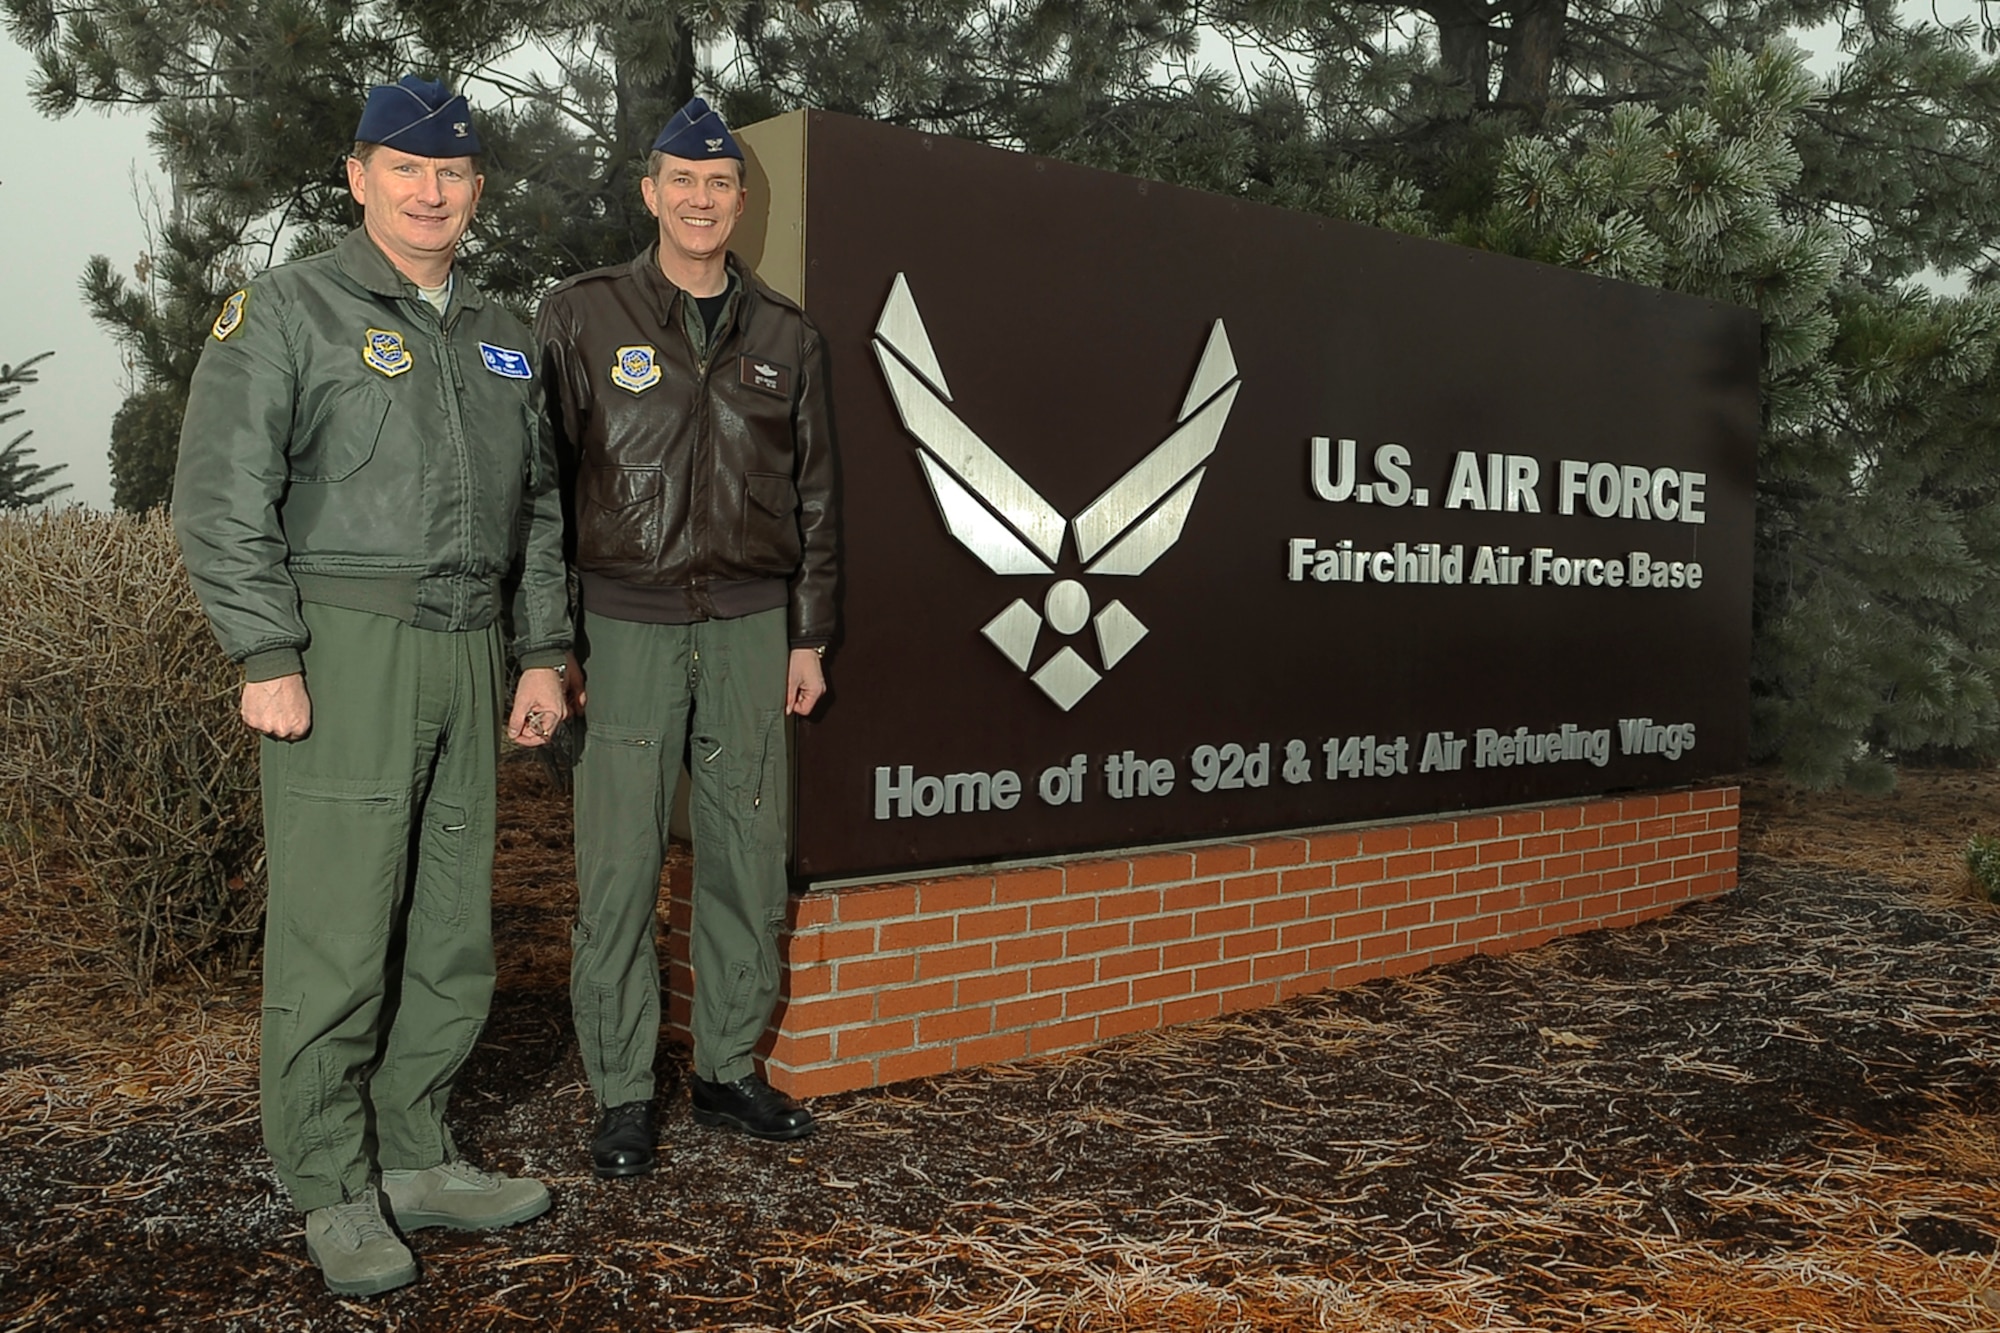 FAIRCHILD AIR FORCE BASE, Wash. – Commanders from the 92nd Air Refueling Wing and the 141st Air Refueling Wing, Col. Robert Thomas and Col. Gregory Bulkley, respectively, pose in front of the new main gate sign commemorating the union of the 92nd and 141st ARWs here Dec. 11. Despite numerous name changes over the years, the 92nd has called Fairchild Air Force Base home; the 141st, one of the nation’s oldest Air National Guard flying units, has been stationed in the Spokane area since 1924. (U.S. Air Force photo / Senior Airman Joshua Chapman)